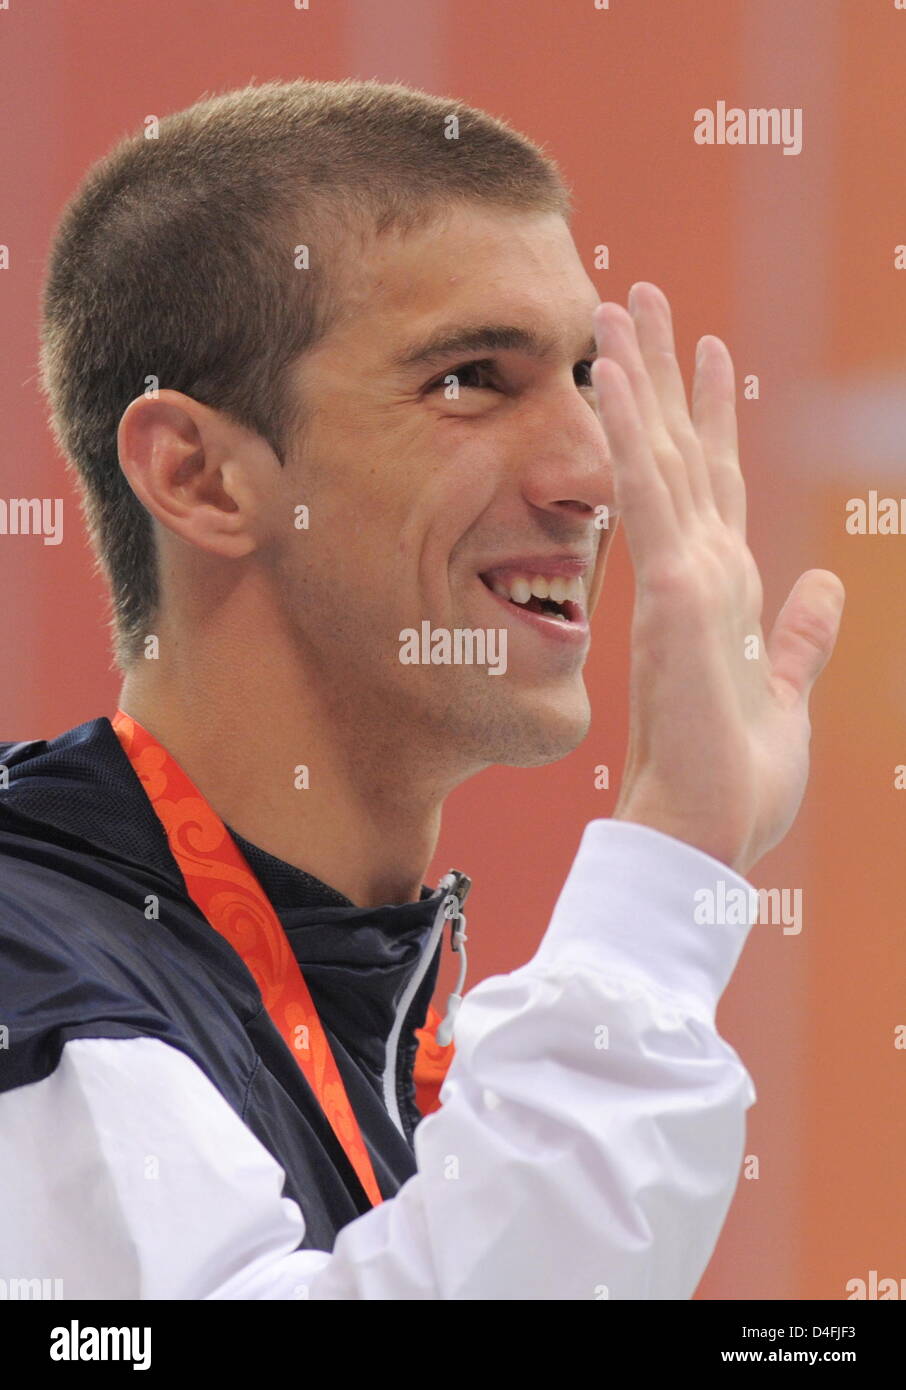 Goldmedallist Michael Phelps celebrates on the podium during the medal ceremony for the men's 400 M individual medley during the 2008 Olympics at the National Aquatics Center in Beijing, China 10 August 2008. Photo: Bernd Thissen dpa (c) dpa - Bildfunk Stock Photo